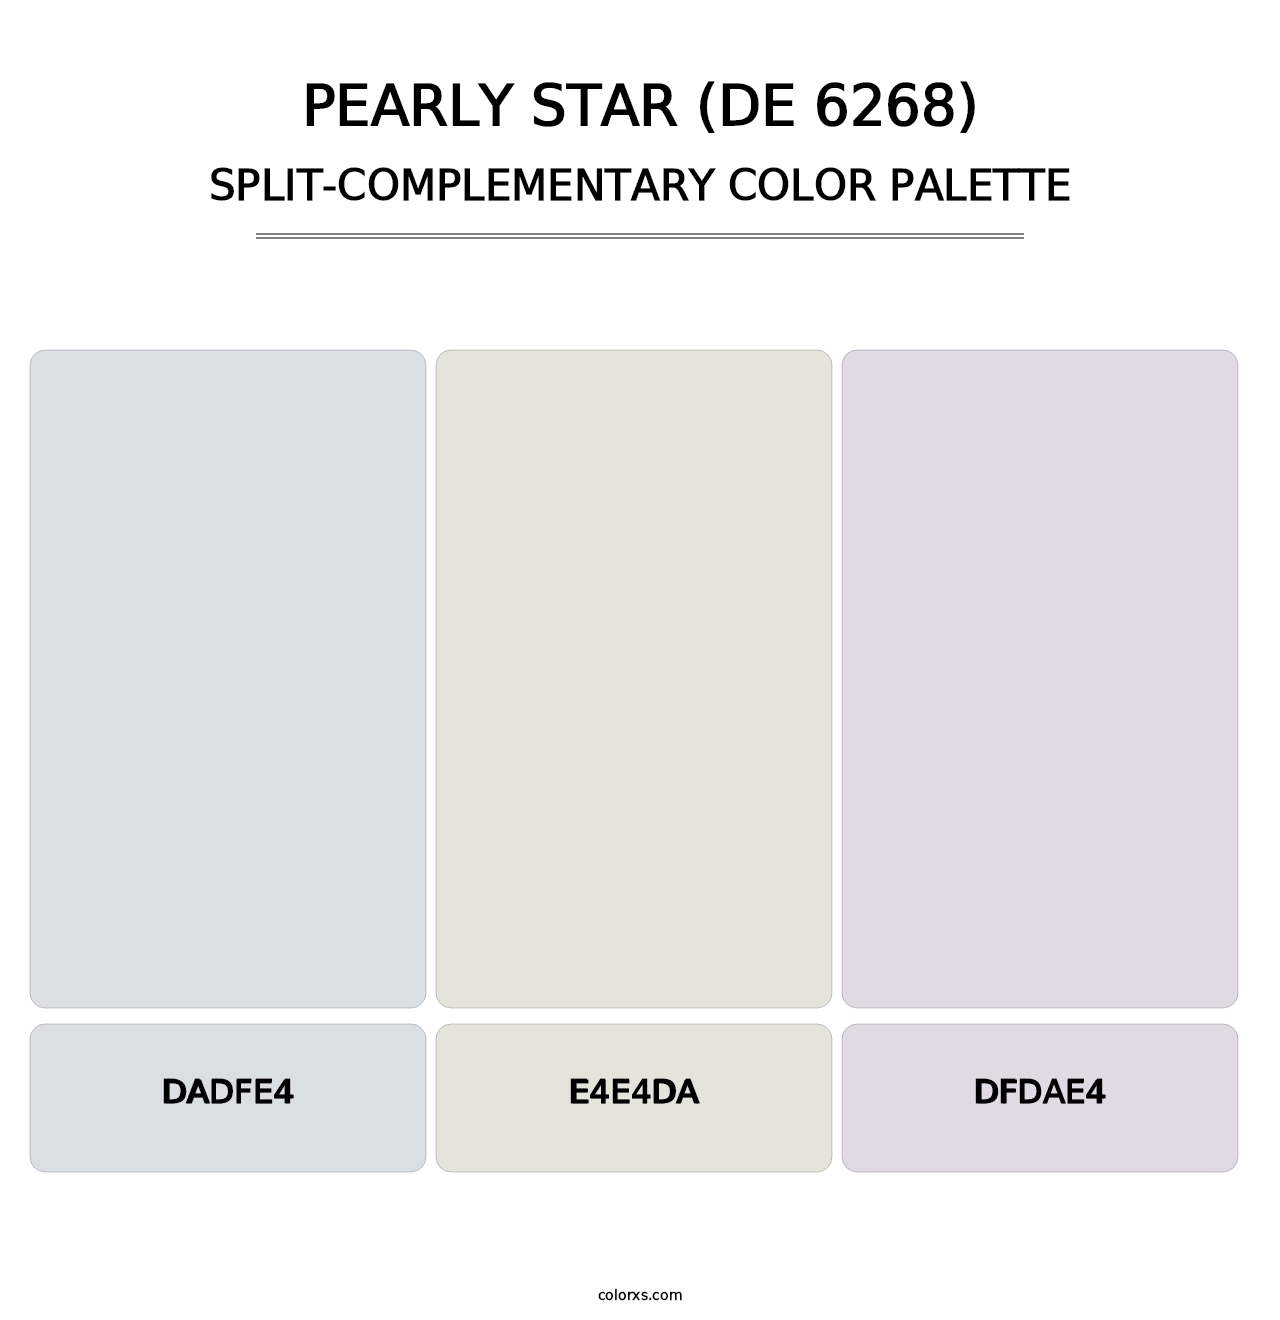 Pearly Star (DE 6268) - Split-Complementary Color Palette